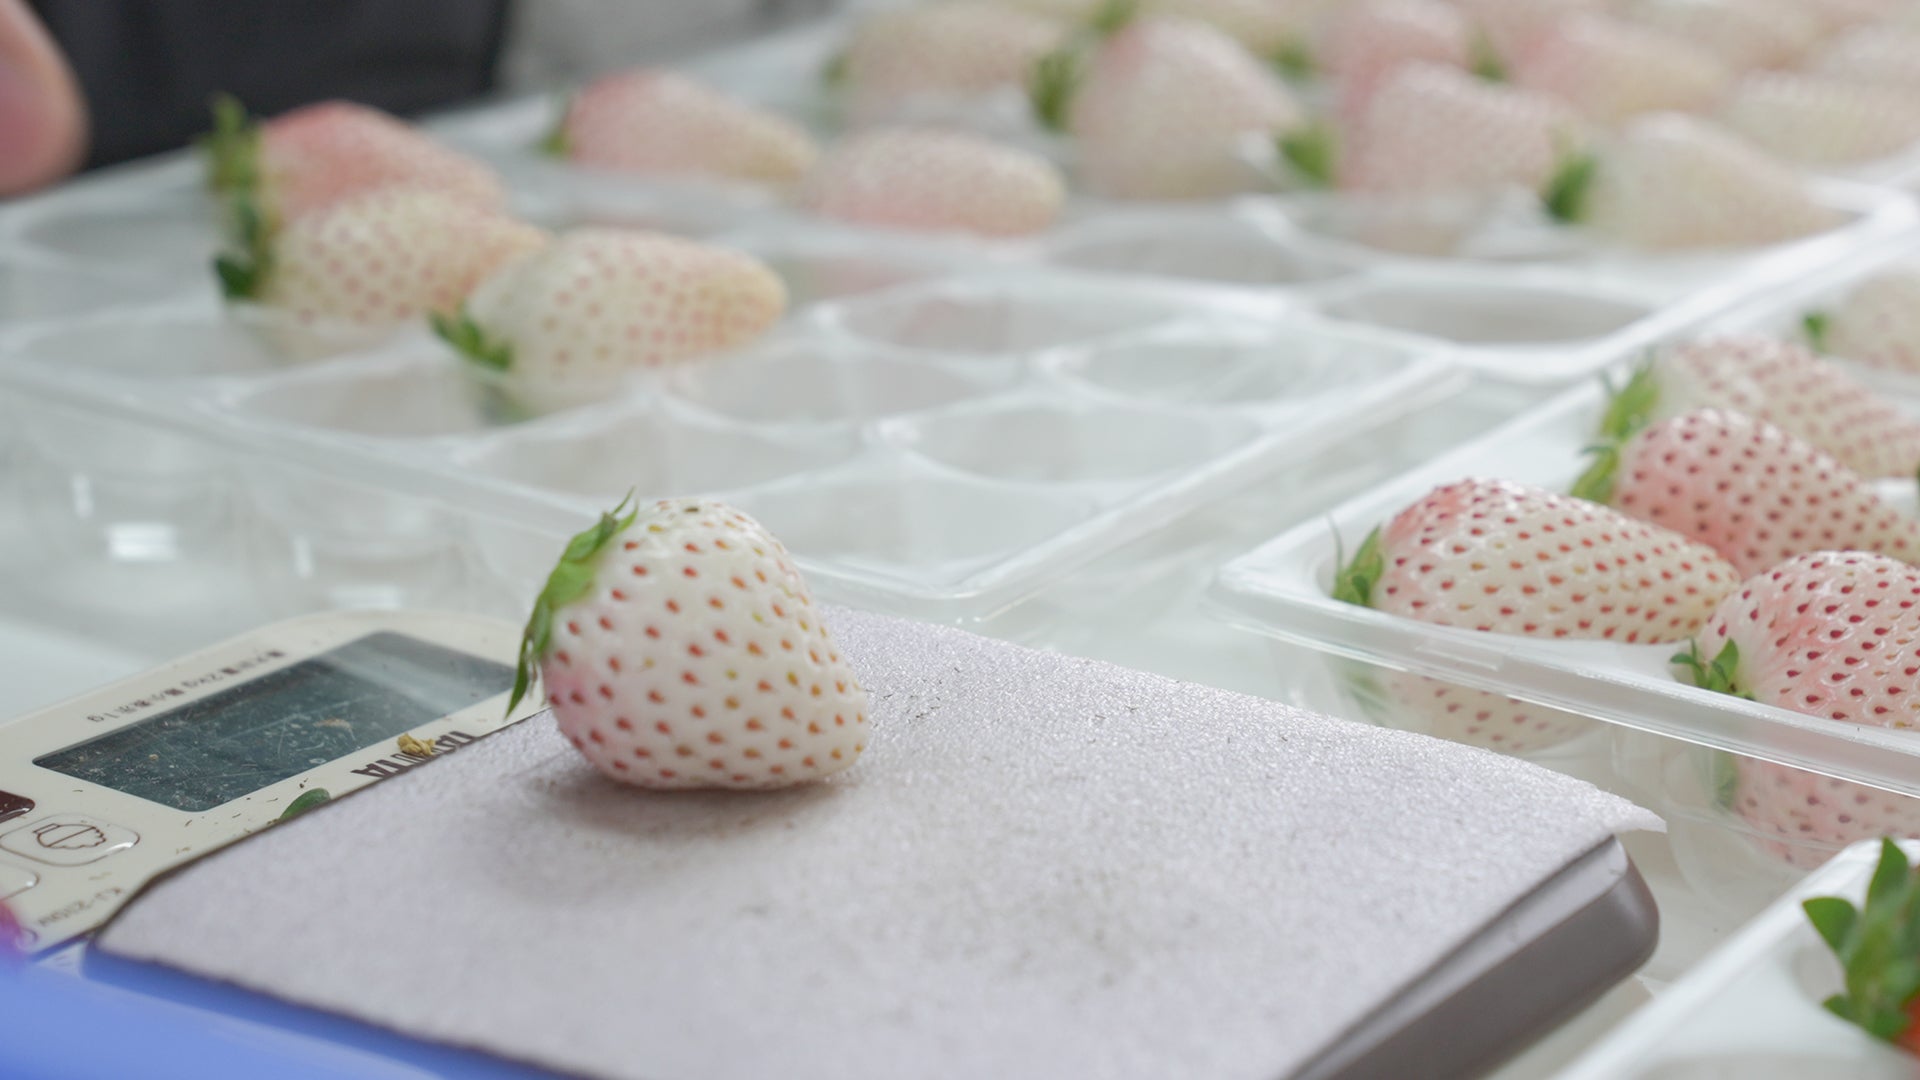 Image of strawberries being weighed